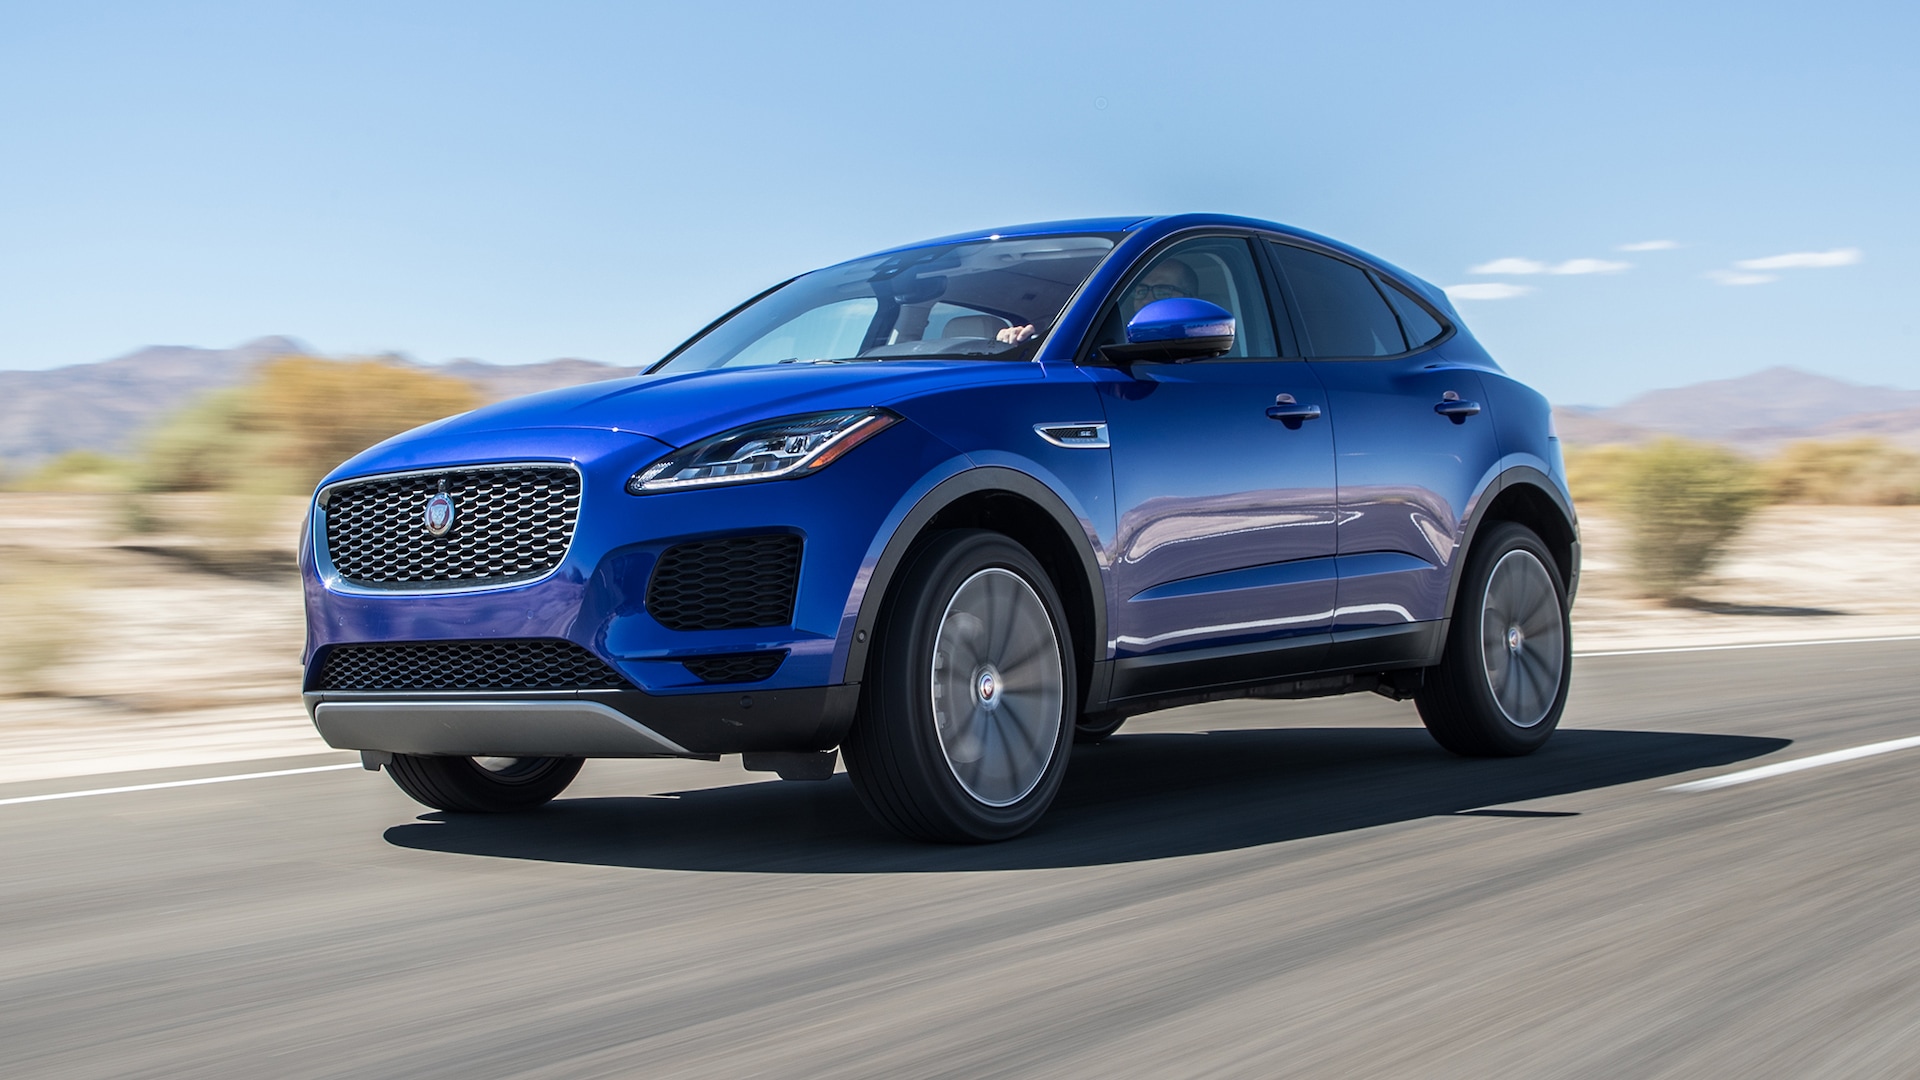 Jaguar E-Pace: 2019 Motor Trend SUV of the Year Contender